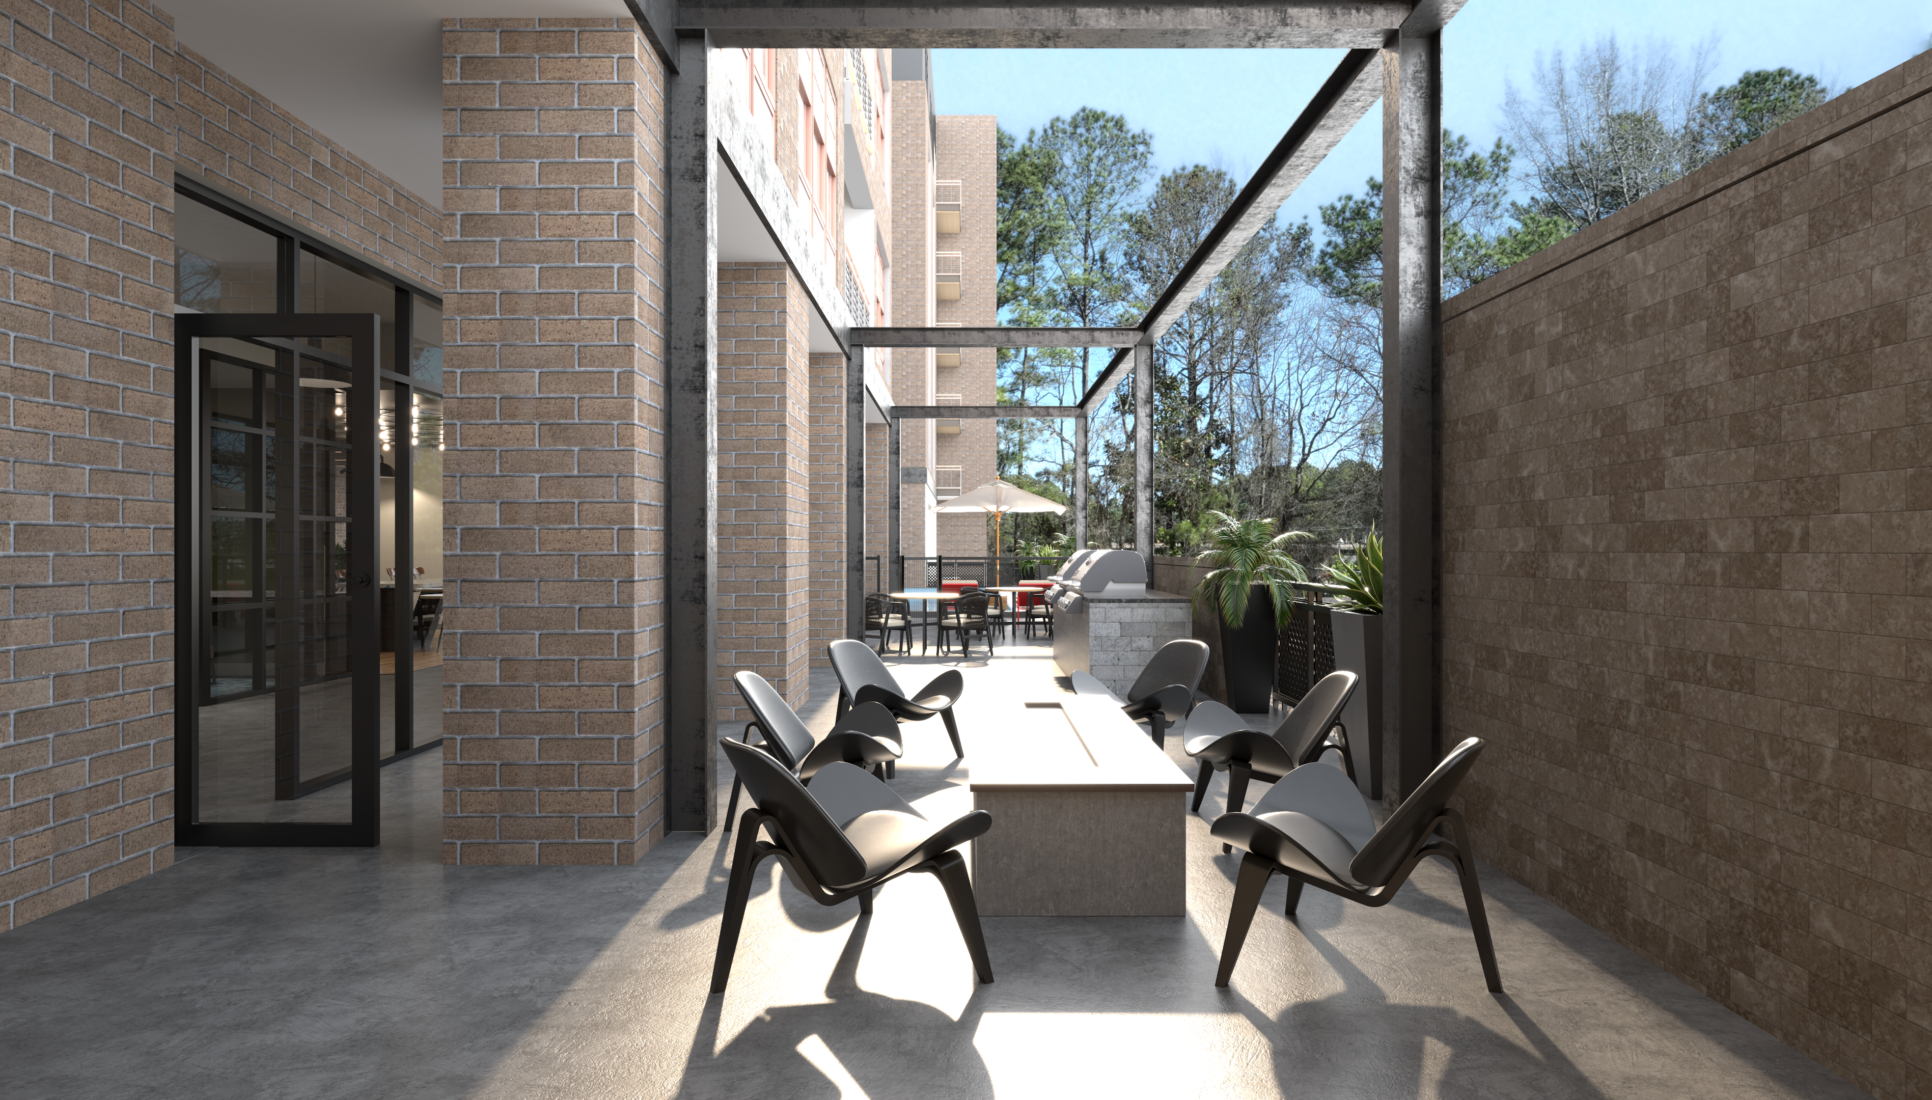 Courtyard and outdoor grill area of Raleigh IronWorks